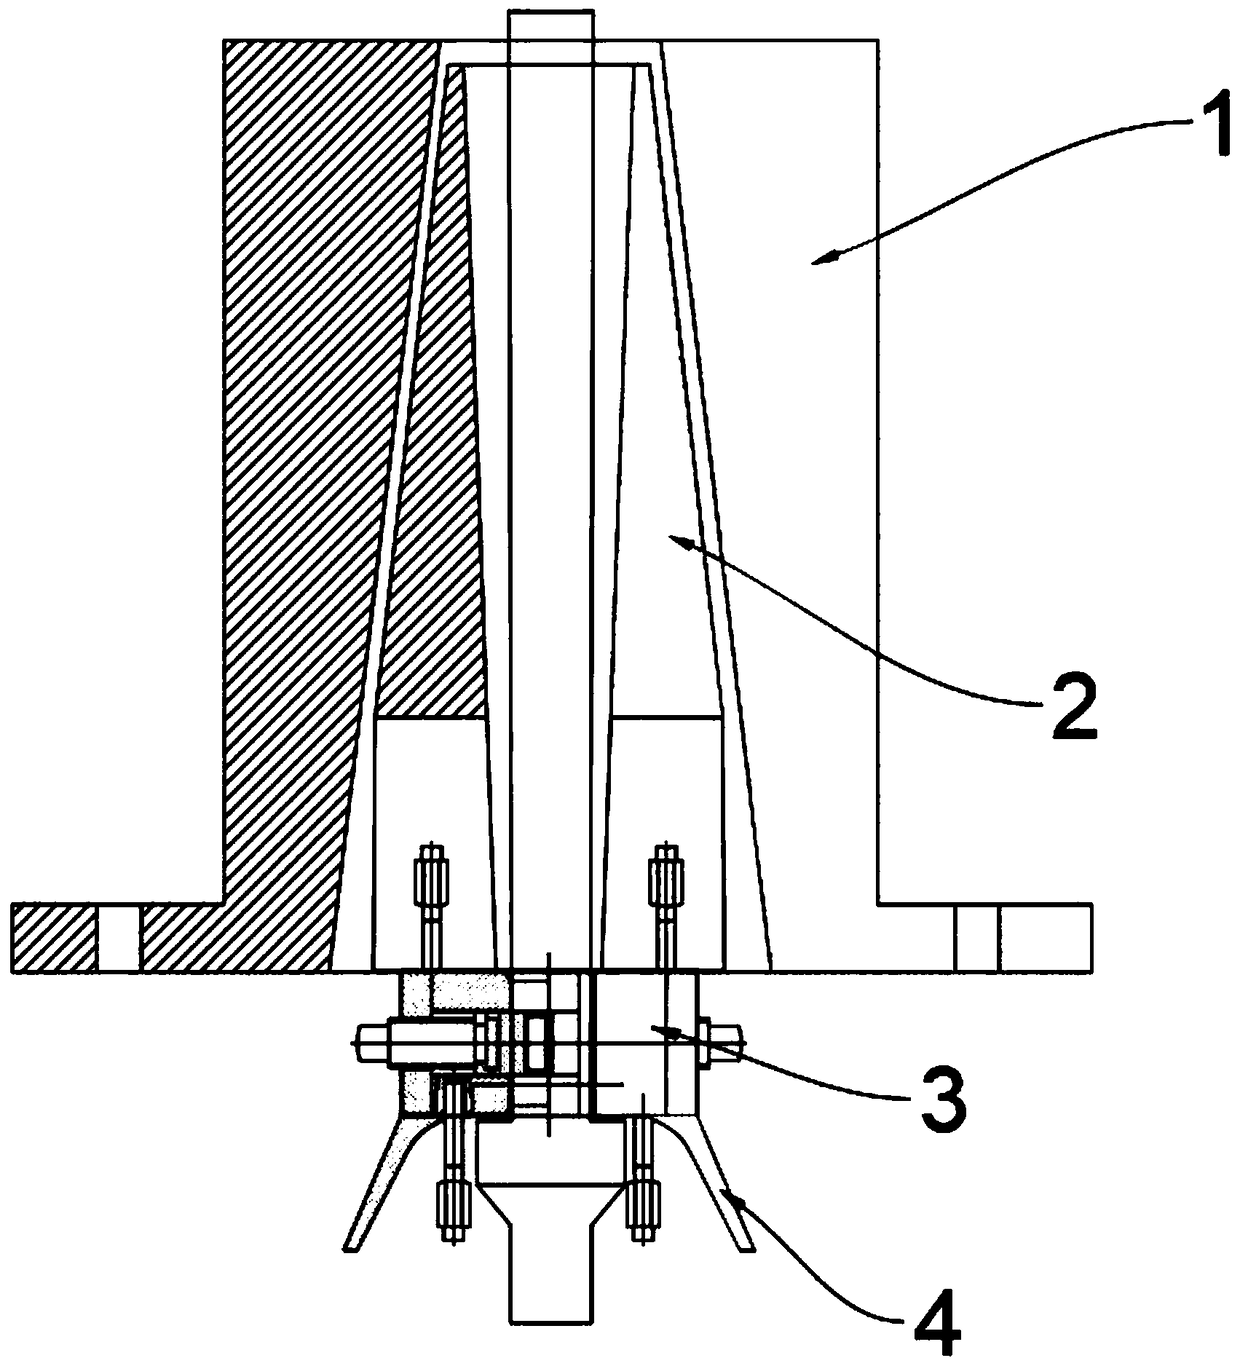 Blowout-preventing upward movement-preventing device for abnormal high pressure operation well and method